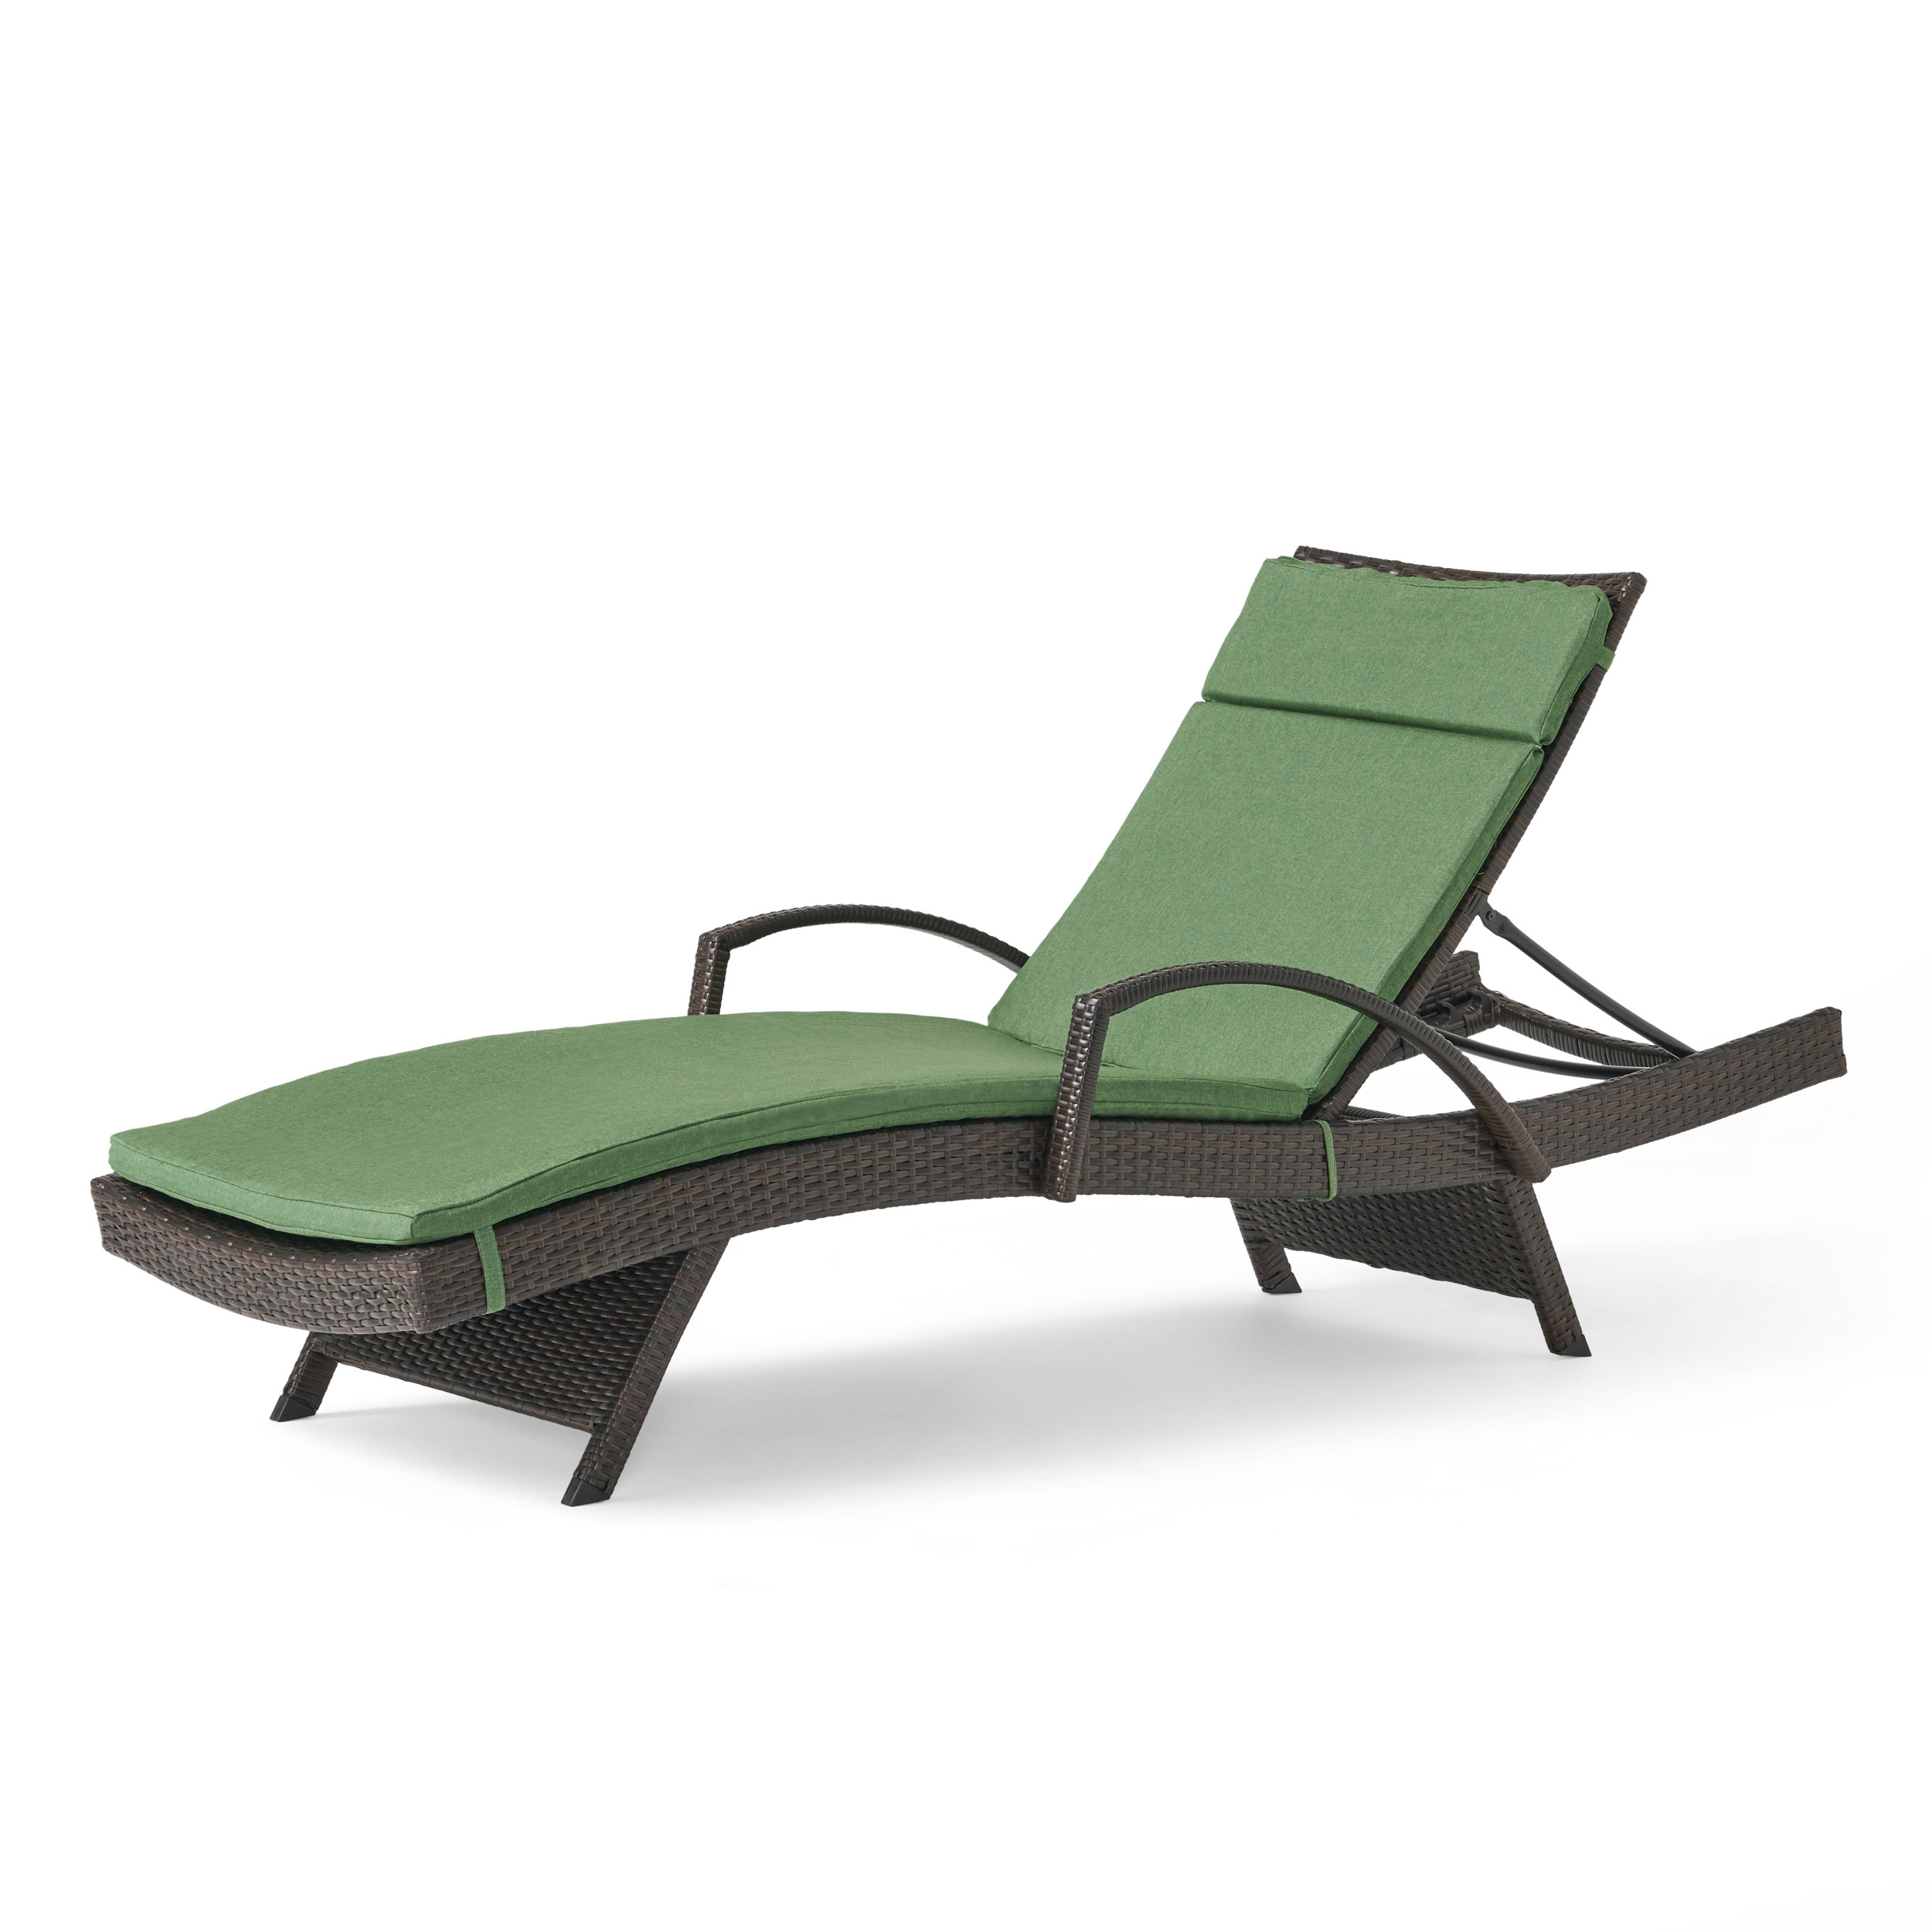 Stratford Outdoor Multi Brown Wicker Adjustable Chaise Lounge with Cushion - image 1 of 9